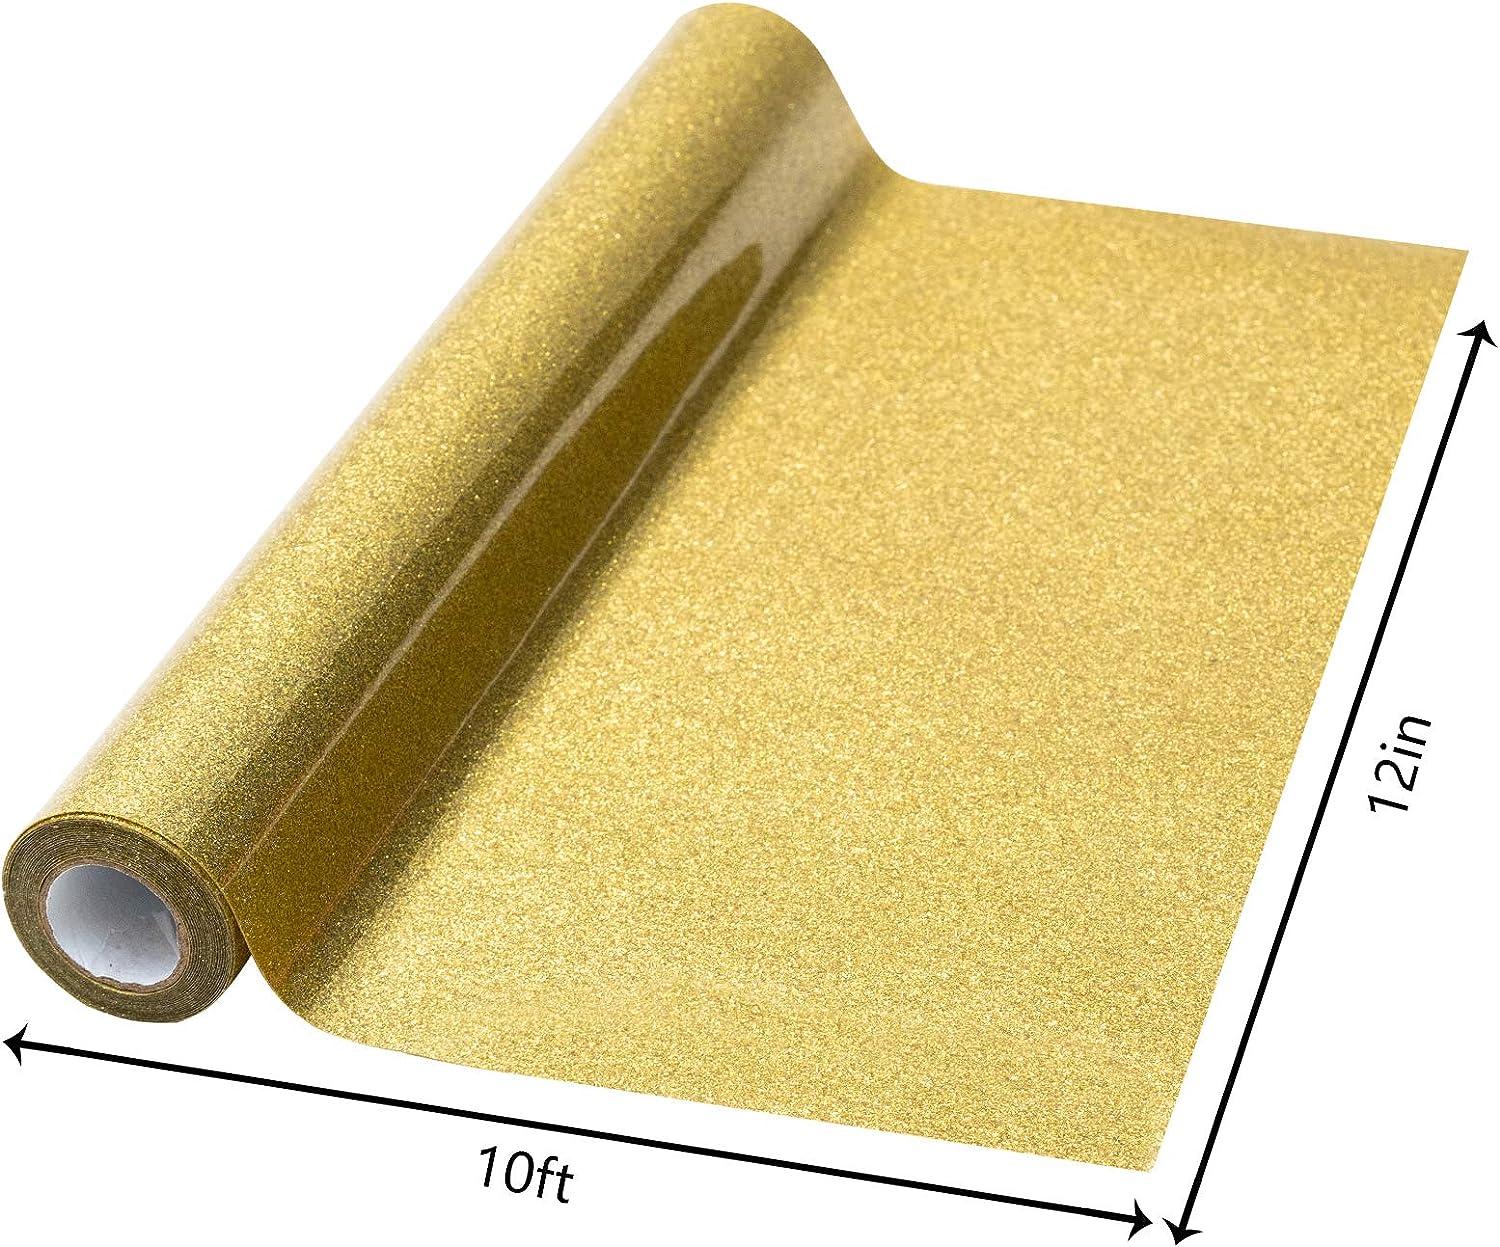 Gold Heat Transfer Vinyl Roll, 12 x 8' Gold HTV Vinyl, Glossy Adhesive  Gold Iron on Vinyl - Easy to Weed & Cut Vinyl HTV for T-Shirt (Gold, 12  inch x